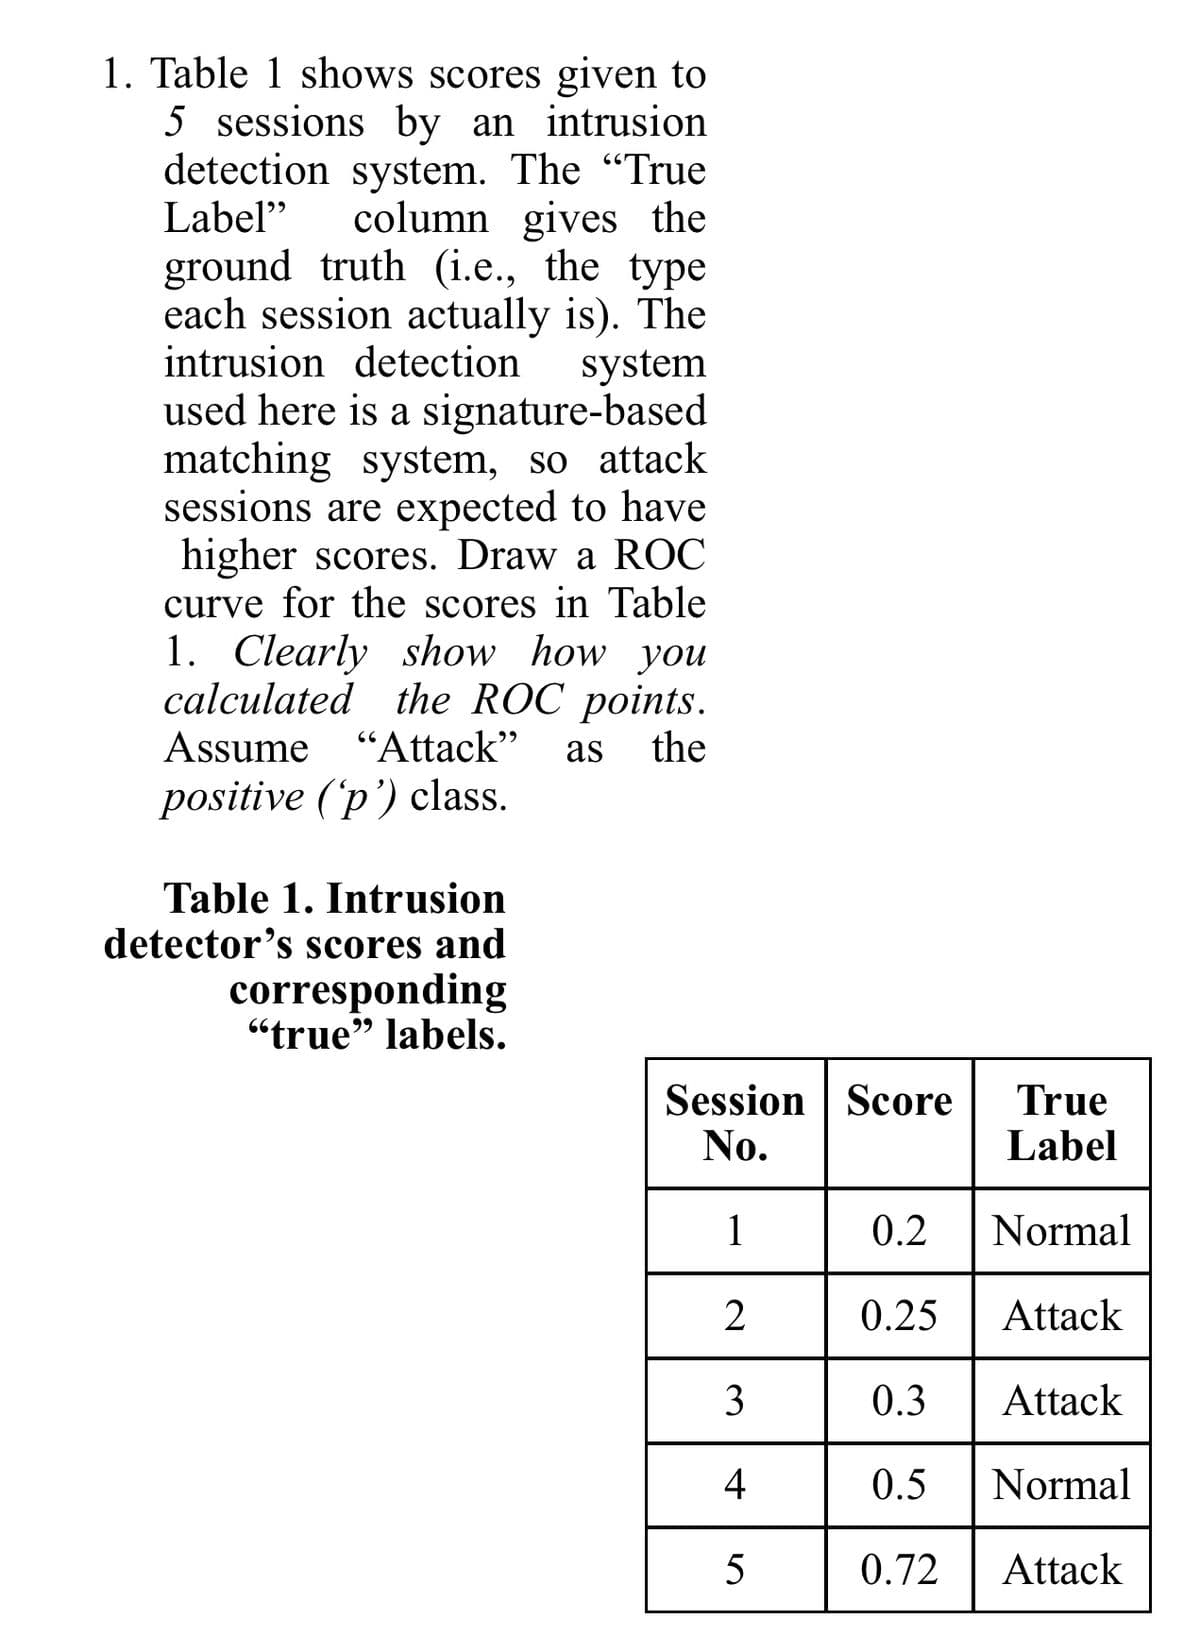 1. Table 1 shows scores given to
5 sessions by an intrusion
detection system. The "True
Label"
column gives the
ground truth (i.e., the type
each session actually is). The
intrusion detection
used here is a signature-based
matching system, so attack
sessions are expected to have
higher scores. Draw a ROC
curve for the scores in Table
1. Clearly show how you
calculated the ROC points.
system
Assume "Attack"
as
the
positive ('p') class.
Table 1. Intrusion
detector's scores and
corresponding
“true" labels.
99
Session Score
No.
True
Label
1
0.2
Normal
2
0.25
Attack
3
0.3
Attack
4
0.5
Normal
5
0.72
Attack
